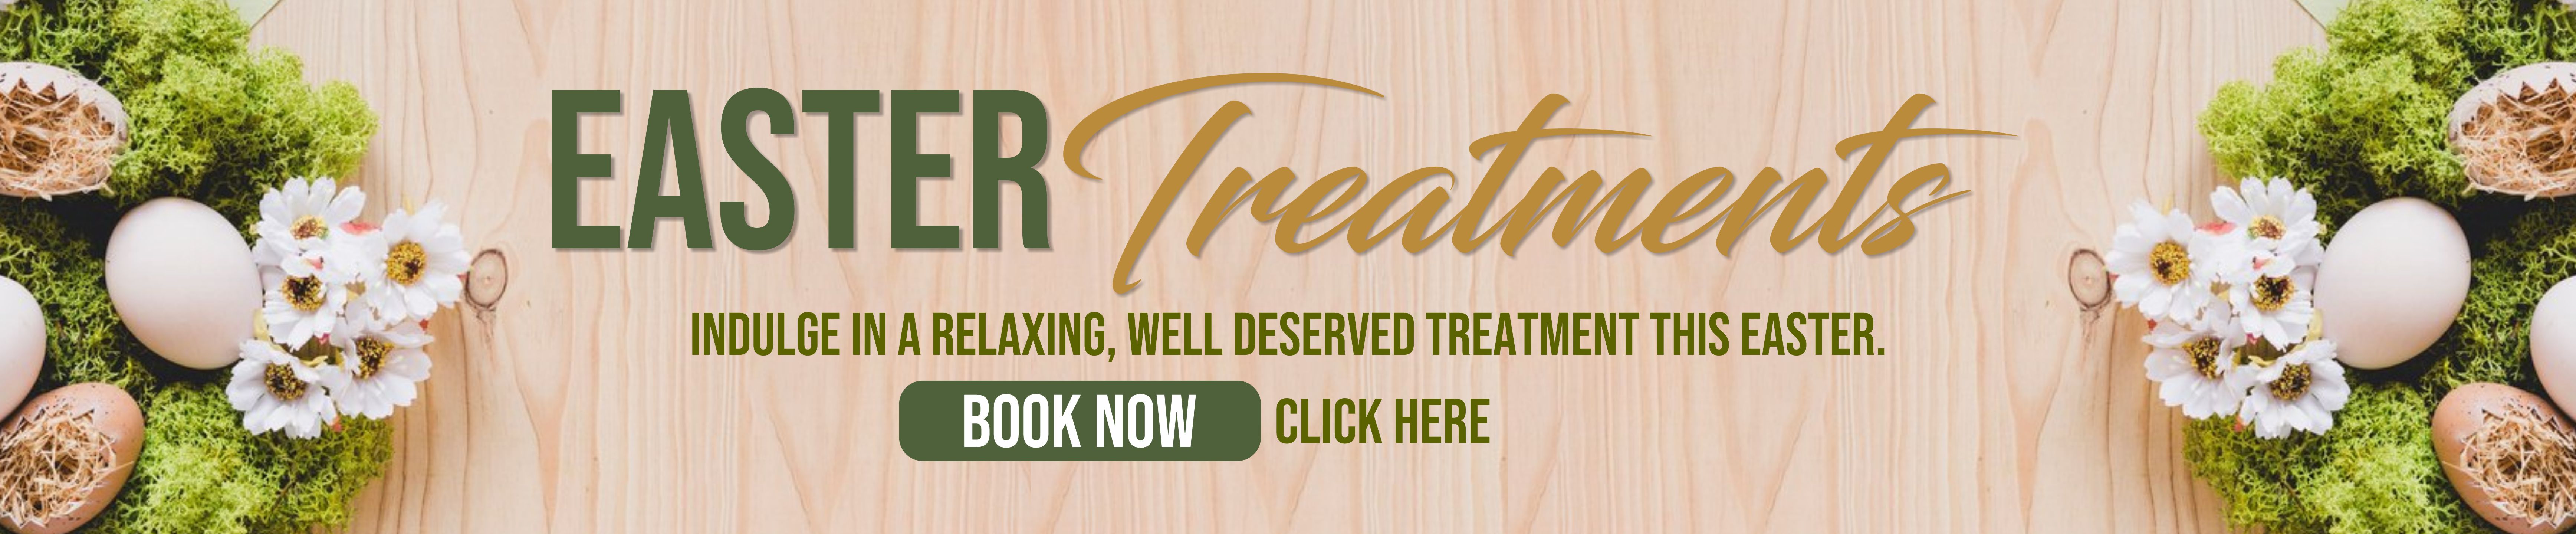 spa in the Country easter treatment specials